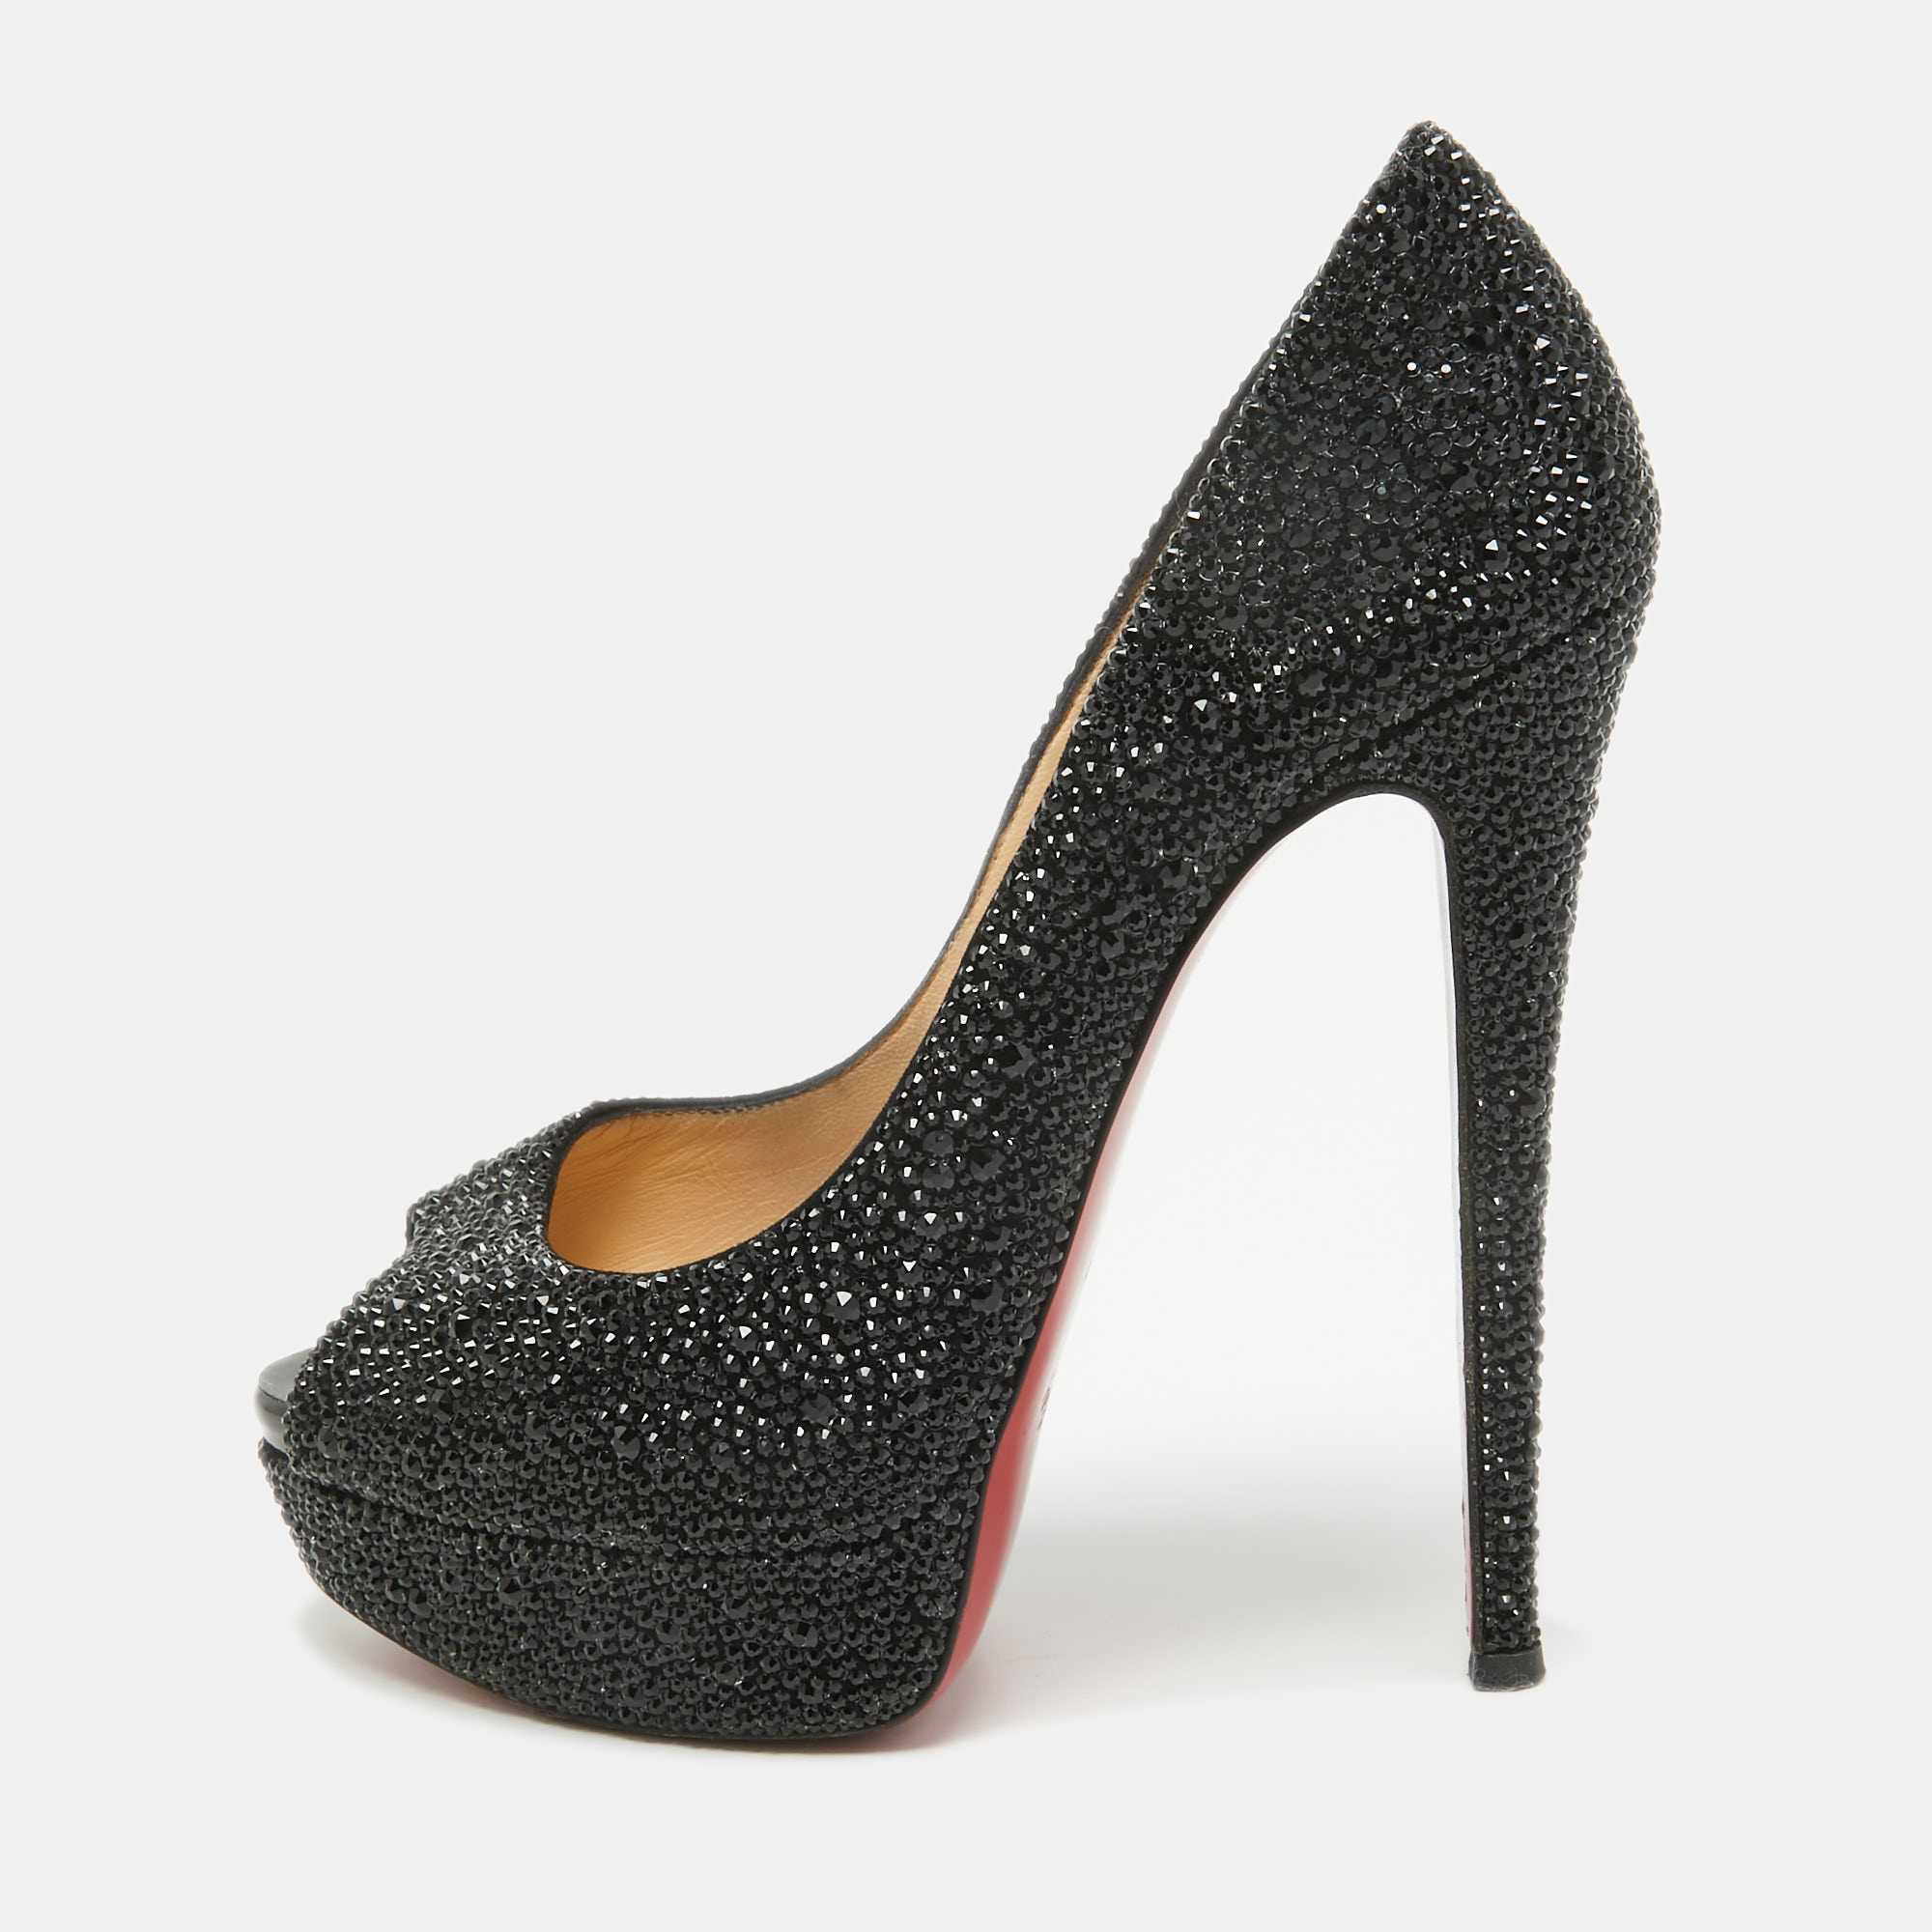 Pre-owned Christian Louboutin Black Crystal Embellished Lady Peep Toe Pumps Size 38.5